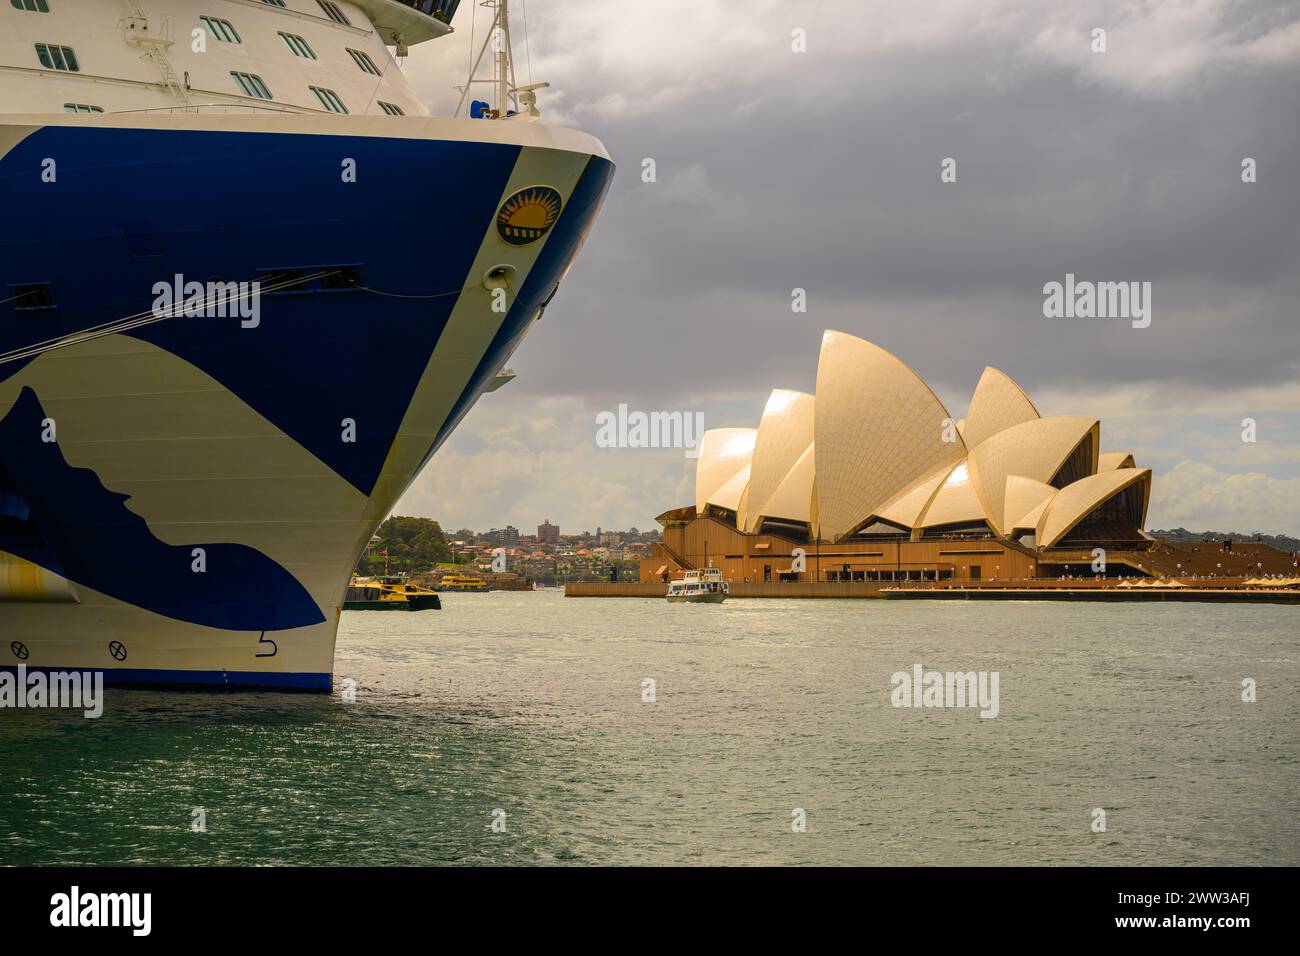 Rear view of the Sydney Opera House with the bow of the Royal Princess cruise ship in the foreground, Sydney Harbour, Australia Stock Photo